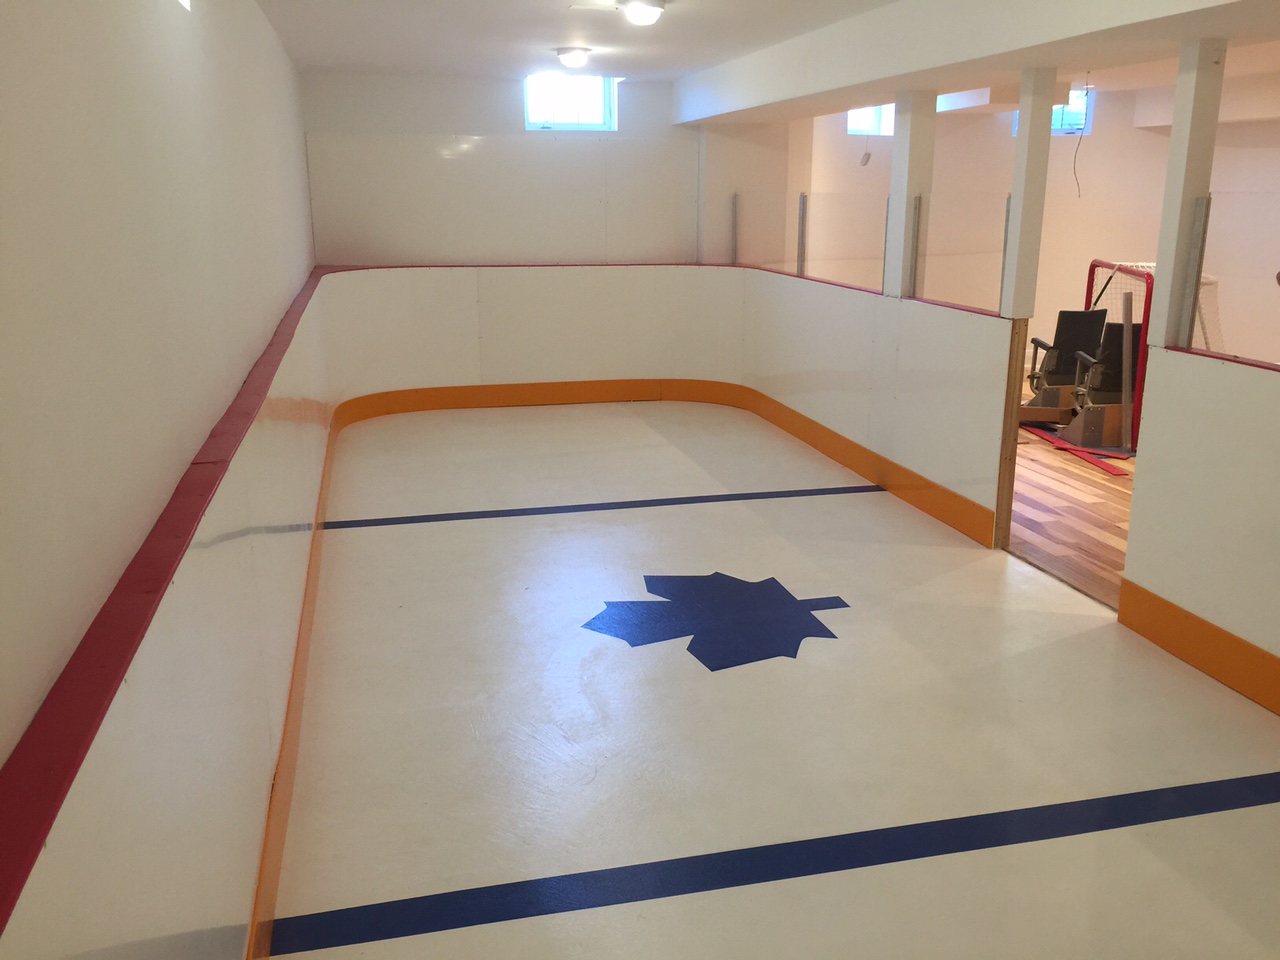 Basement Hockey Rink with Synthetic Ice